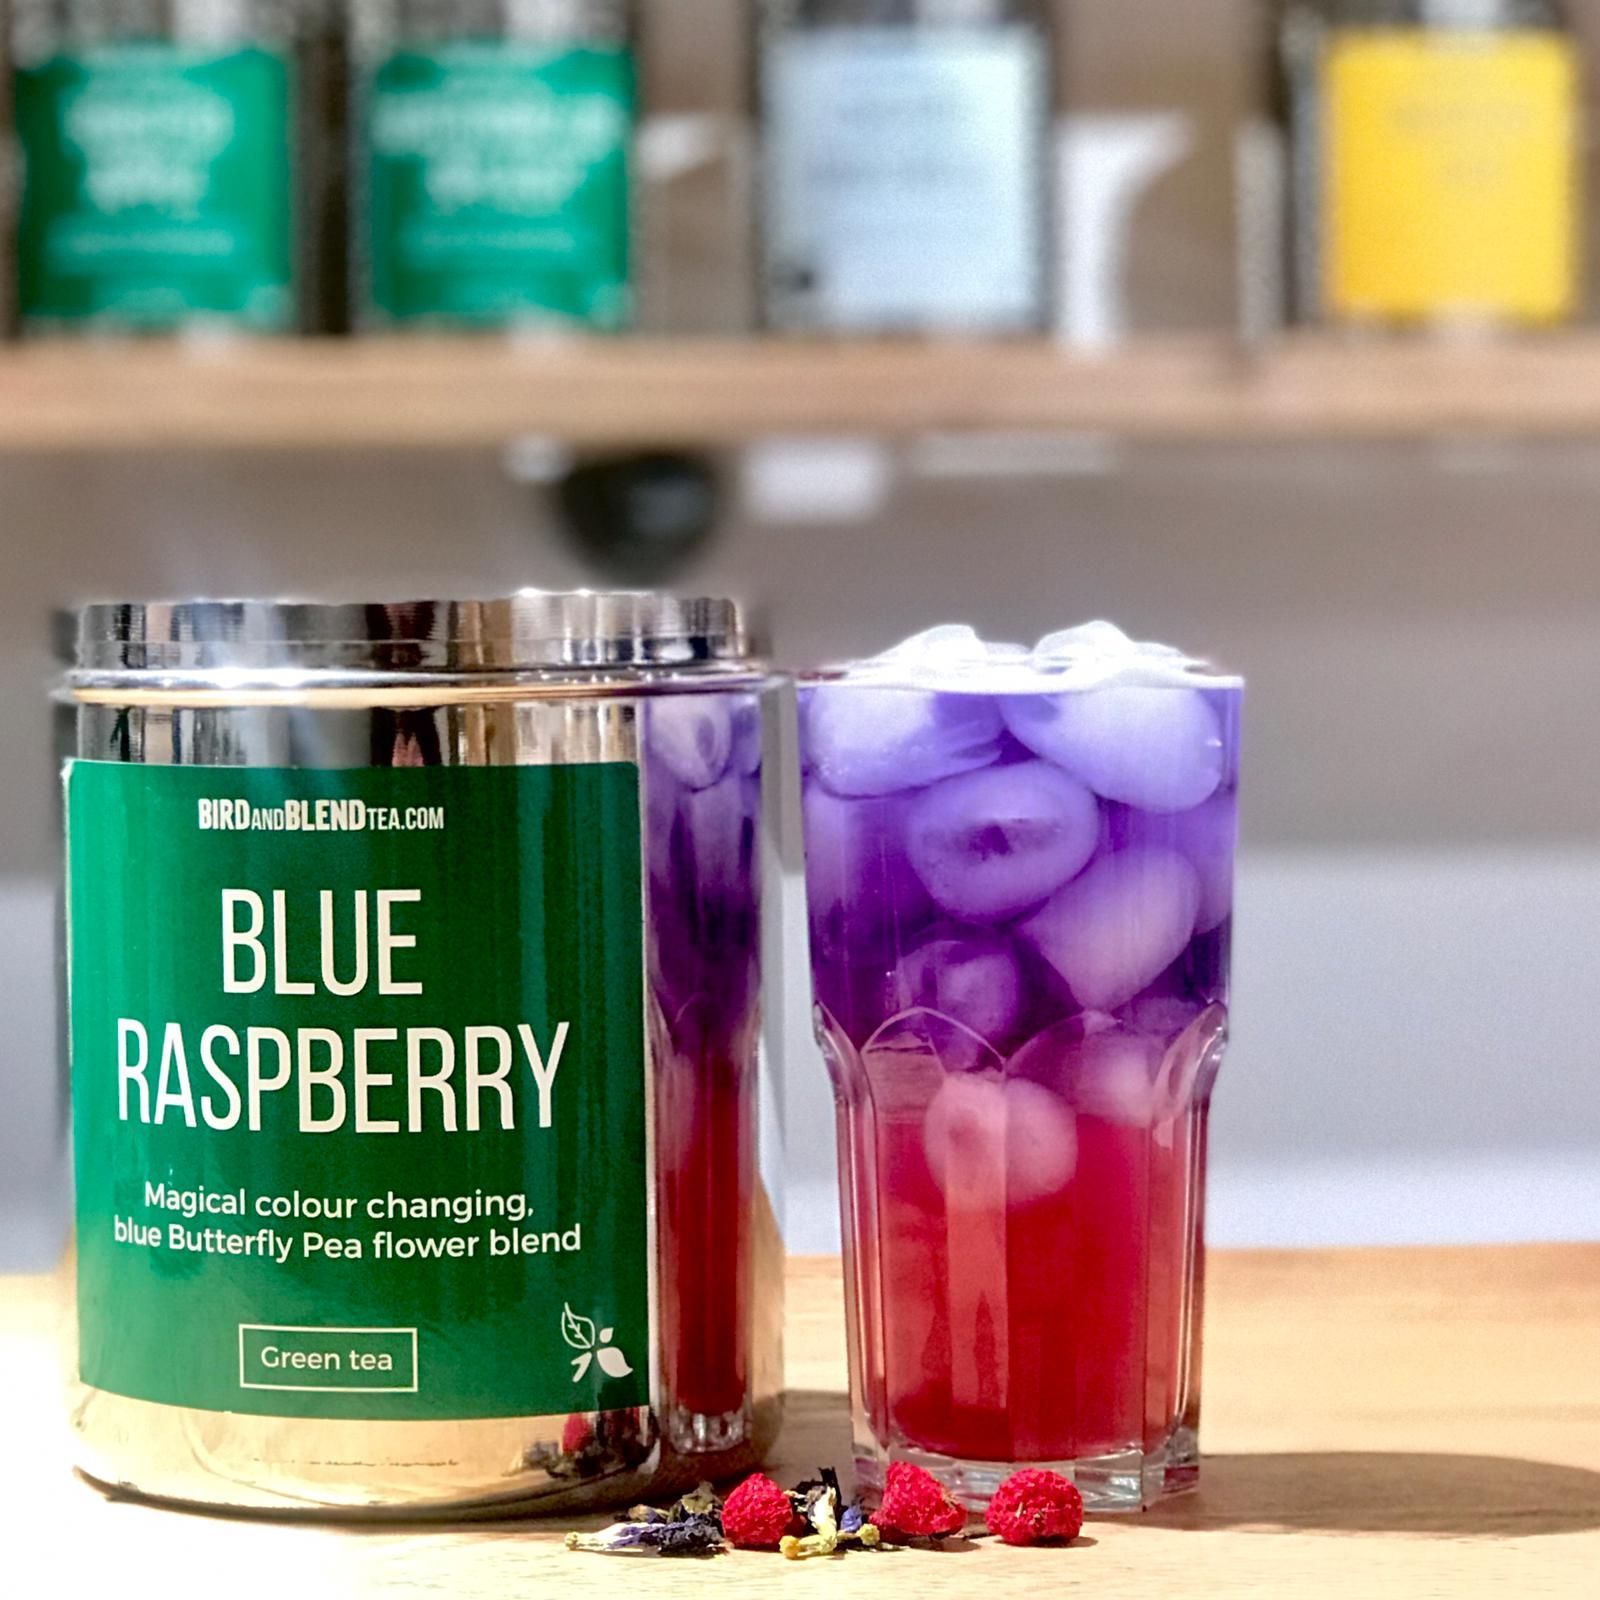 Bird & Tea Co. on Twitter: "Blue Raspberry Magic! ✨ Happy FriYAY Teabirds, we hope you have an amazing weekend! 💙 Get Raspberry: https://t.co/9nYAuyUx1X https://t.co/wFwUxat5nZ" / Twitter